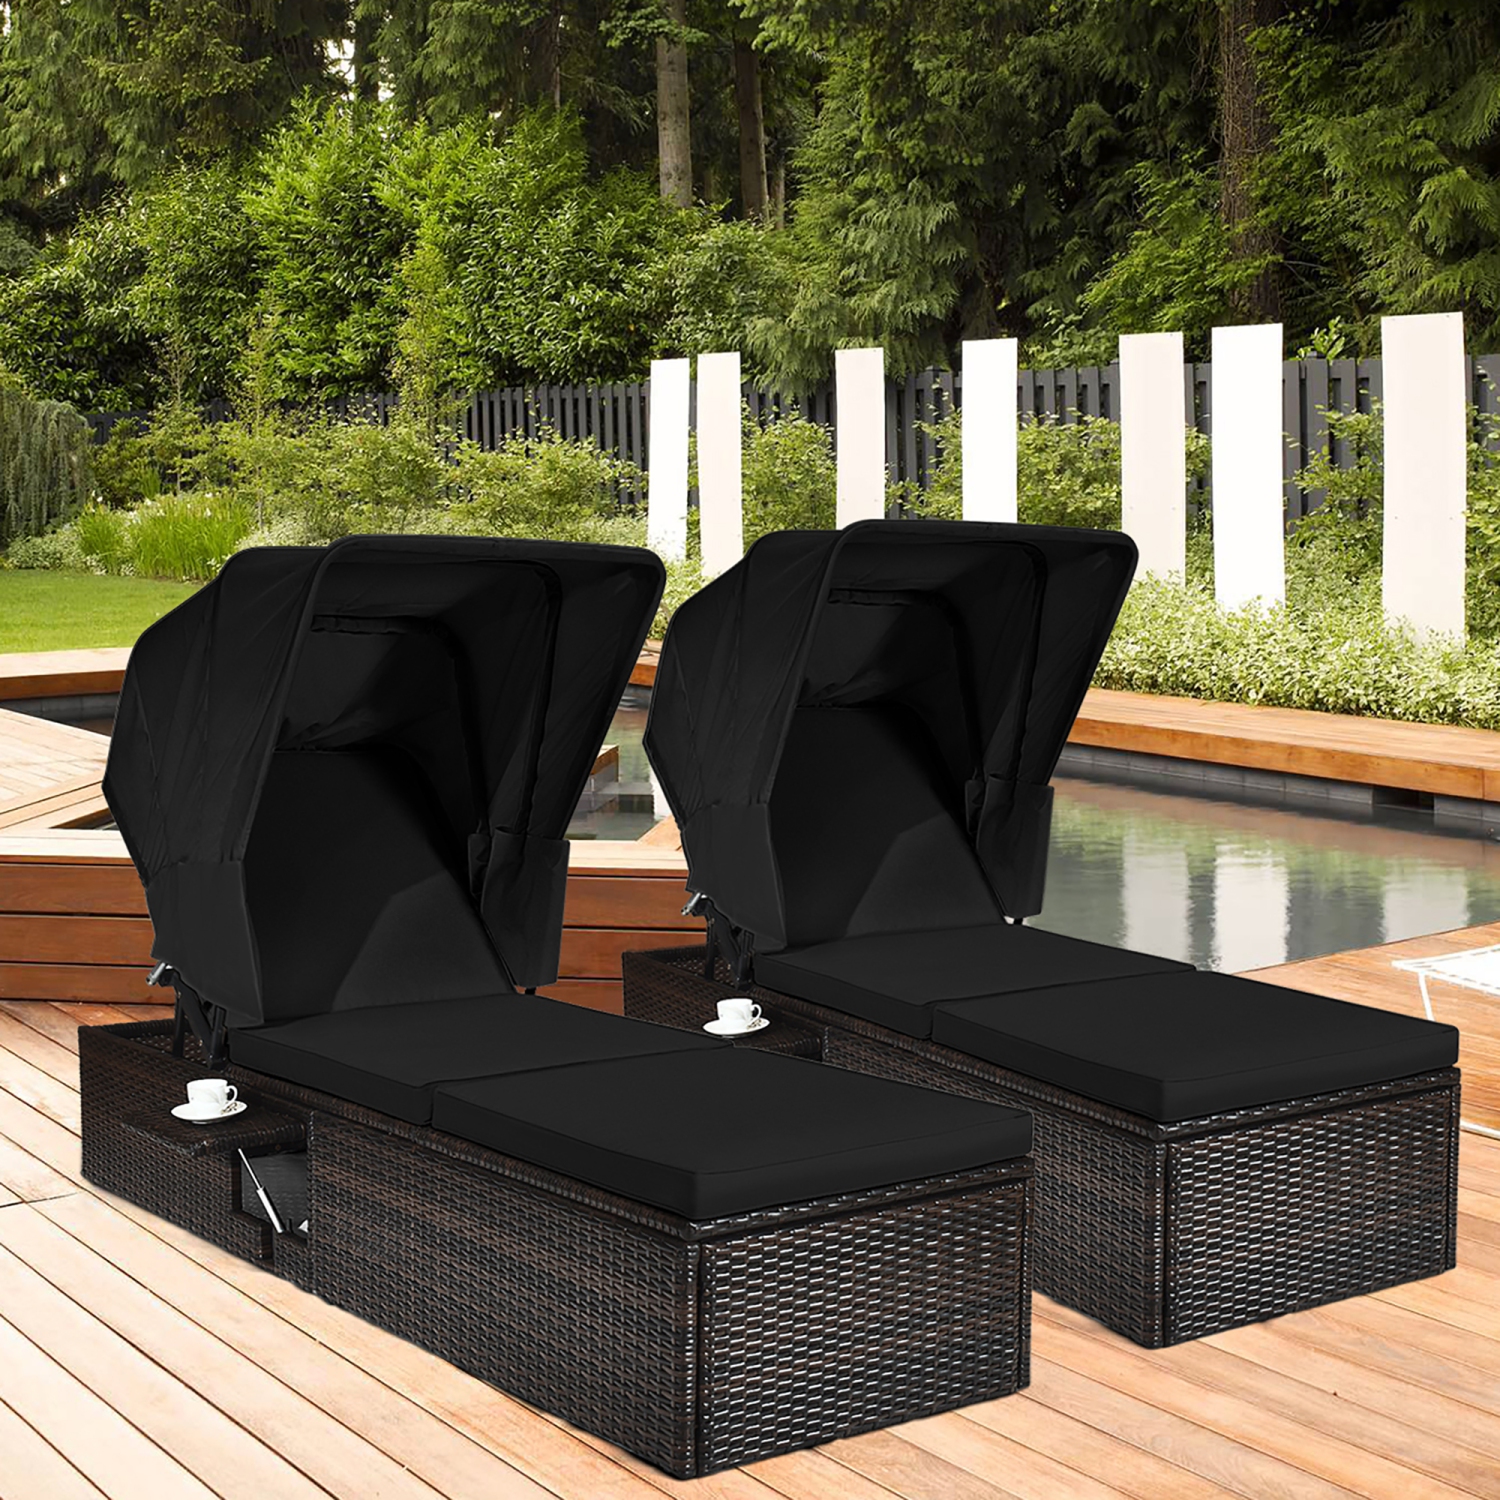 Costway 2PCS Patio Rattan Lounge Chair Chaise Cushion Canopy Adjustable Tea Table